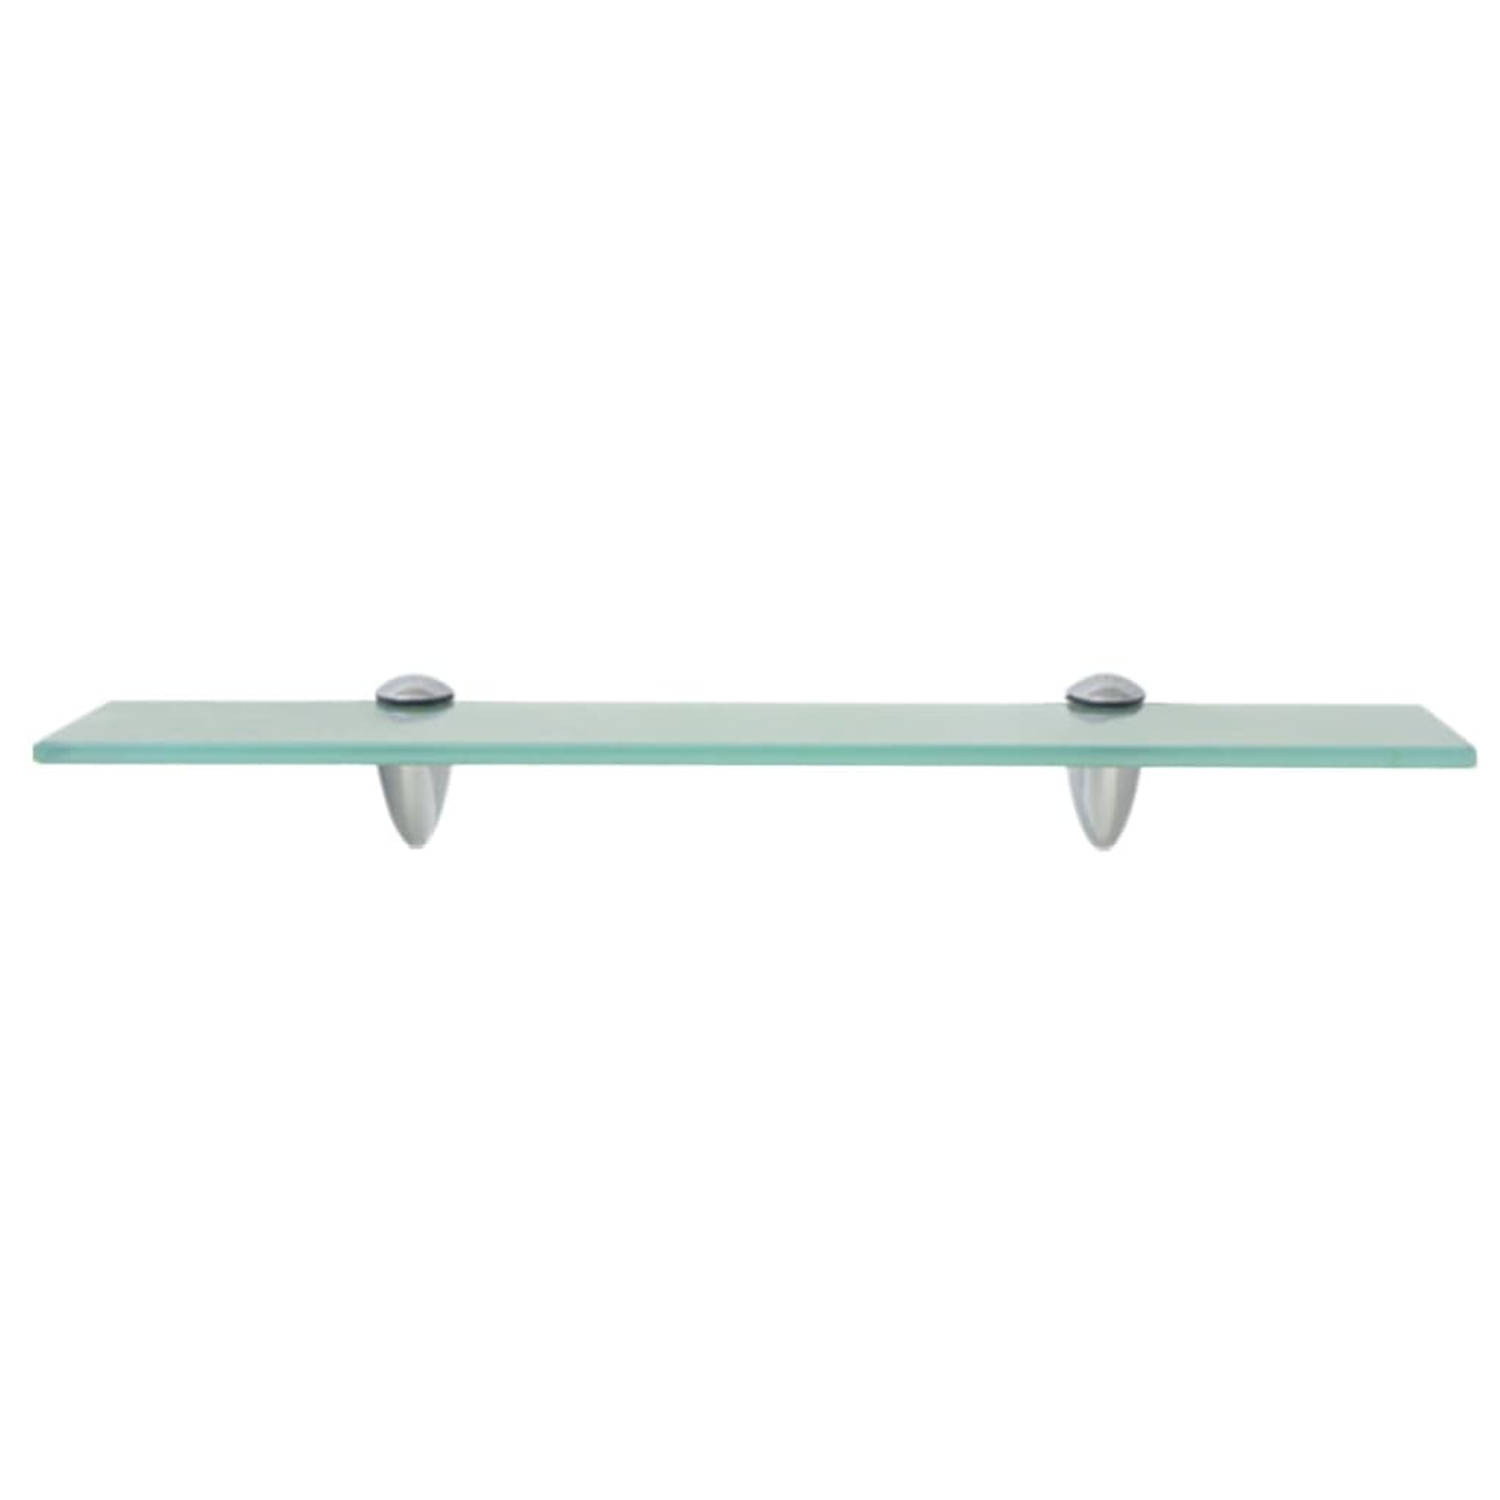 The Living Store Zwevende Plank Glas 50 x 20 cm Transparant 10 kg draagvermogen